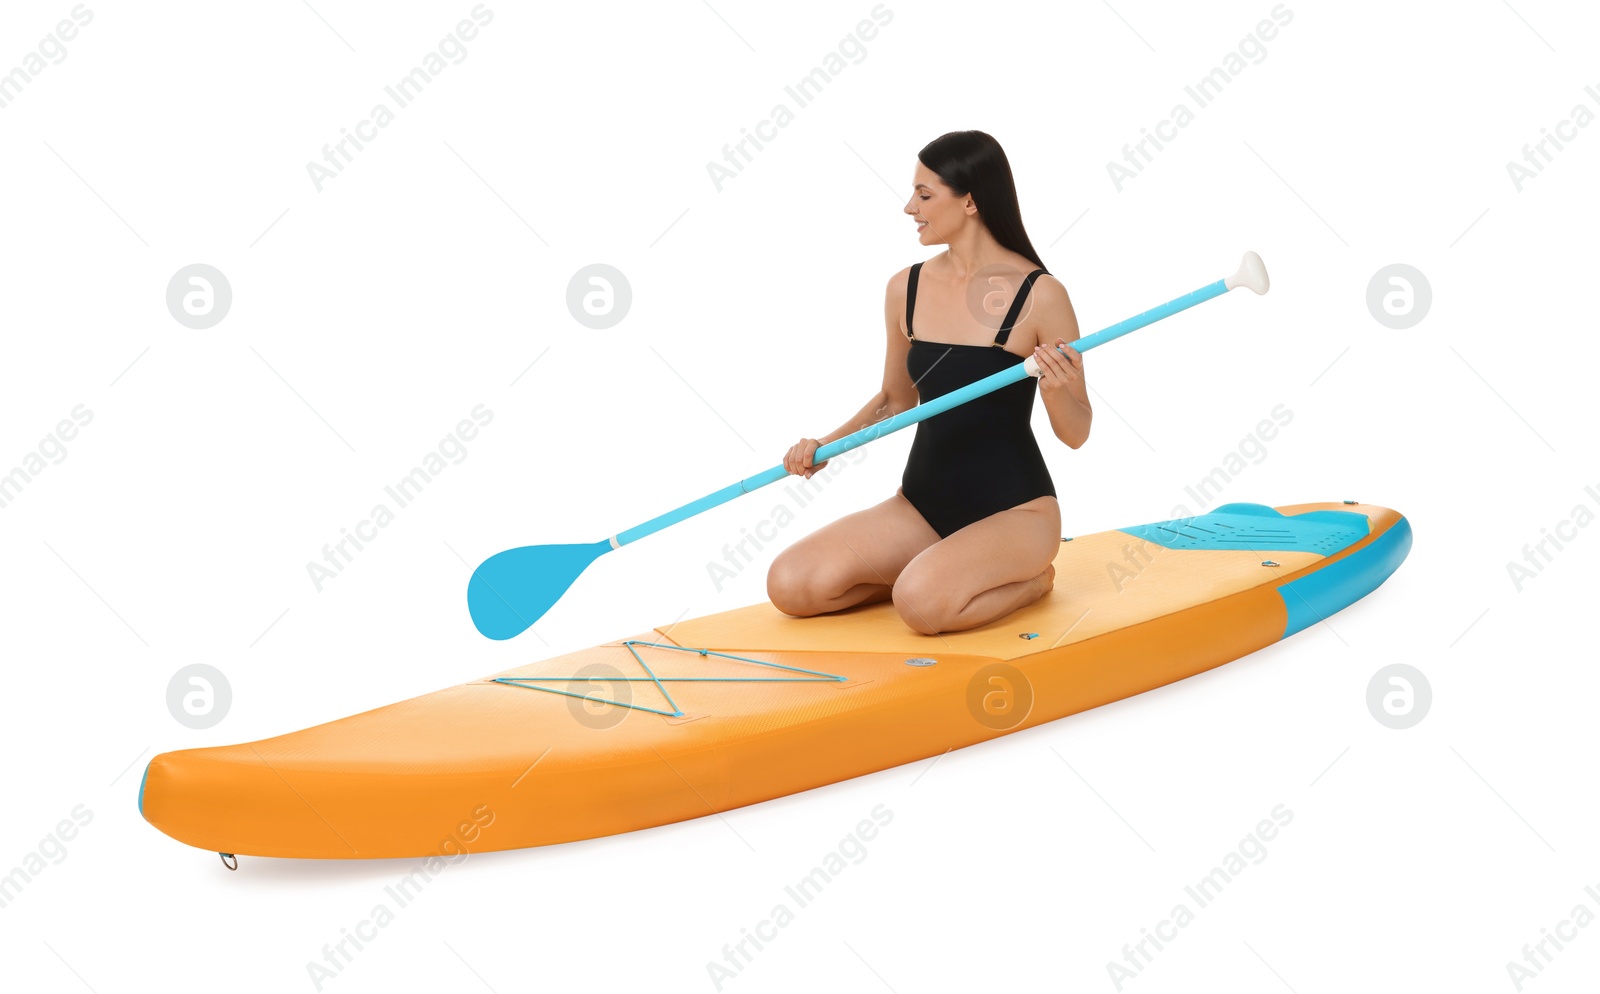 Photo of Happy woman with paddle on orange SUP board against white background